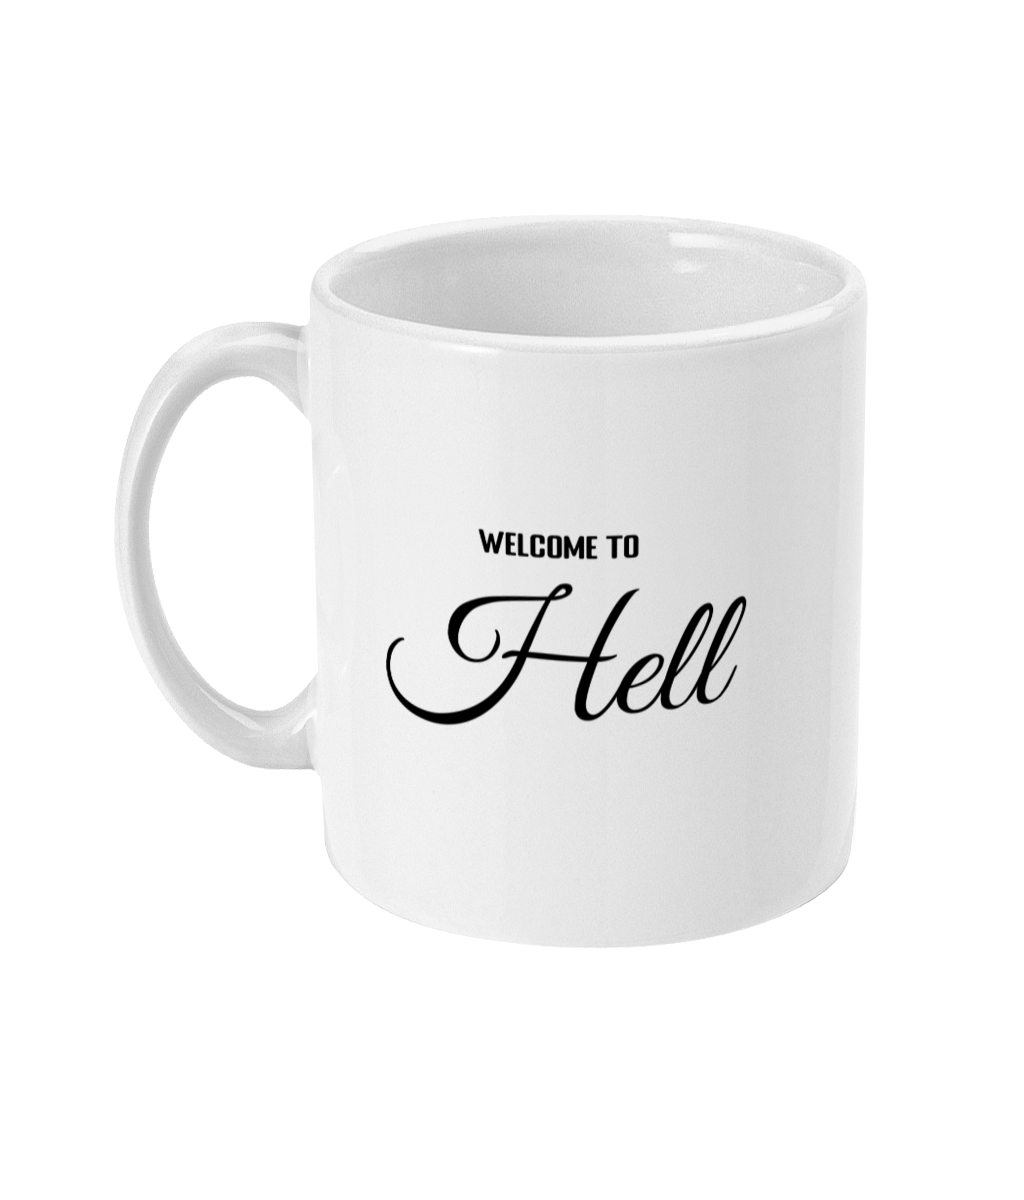 A glossy white 11oz mug with the words 'Welcome to Hell' Printed in the centre in block and cursive font. The mug is placed in front of a simple white background.